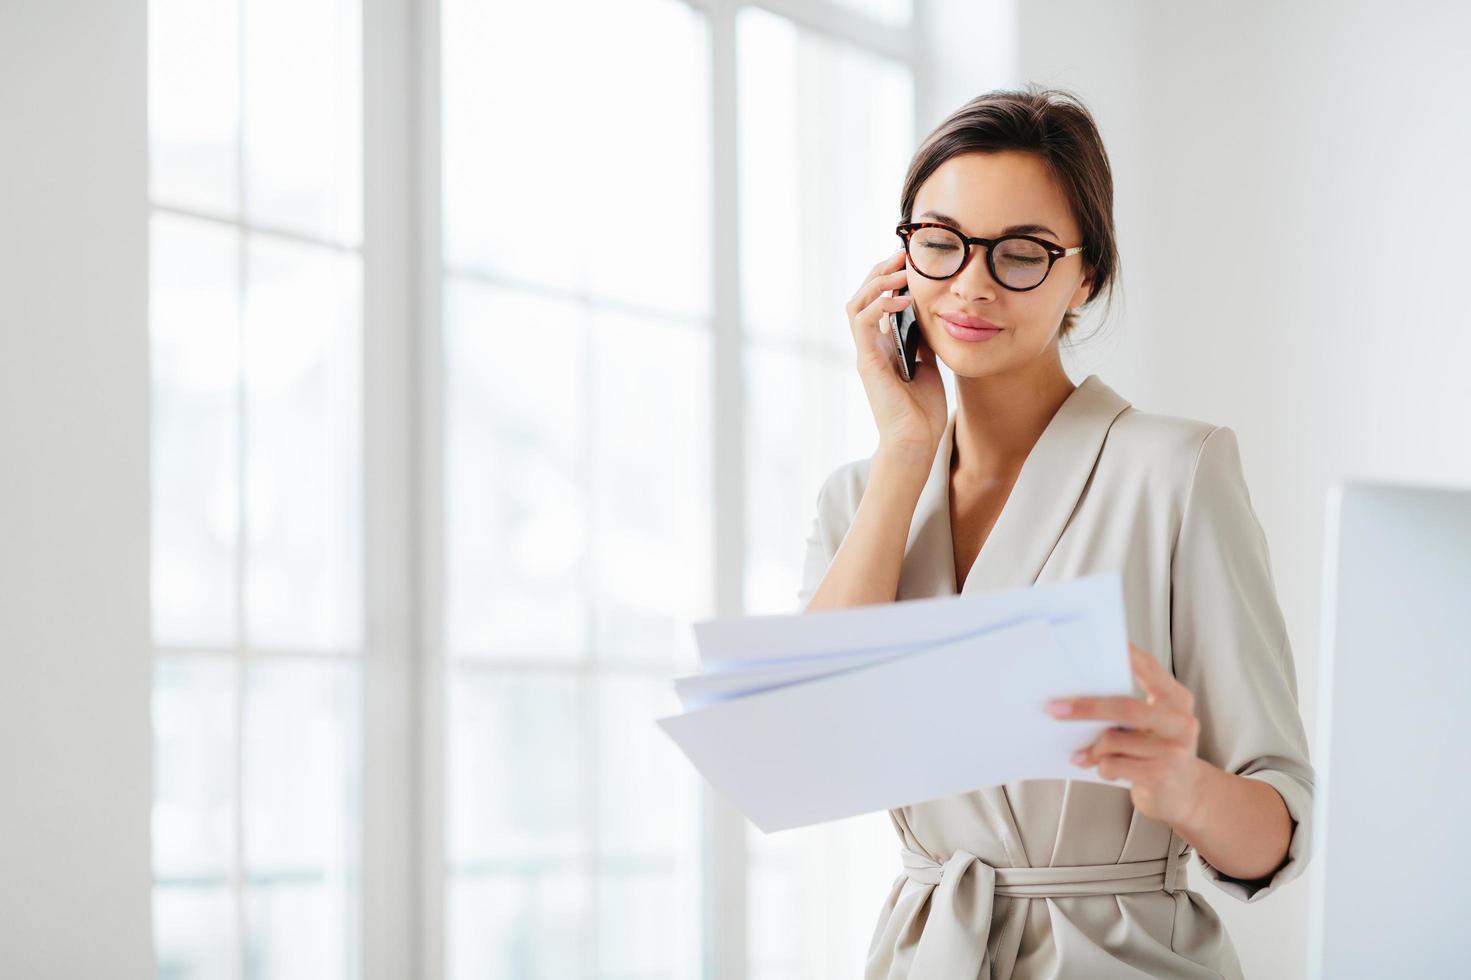 Horizontal shot of business lady discusses details of contract, works in office, concentrated on information from accountings, holds paper documents during telephone conversation, dressed formally photo